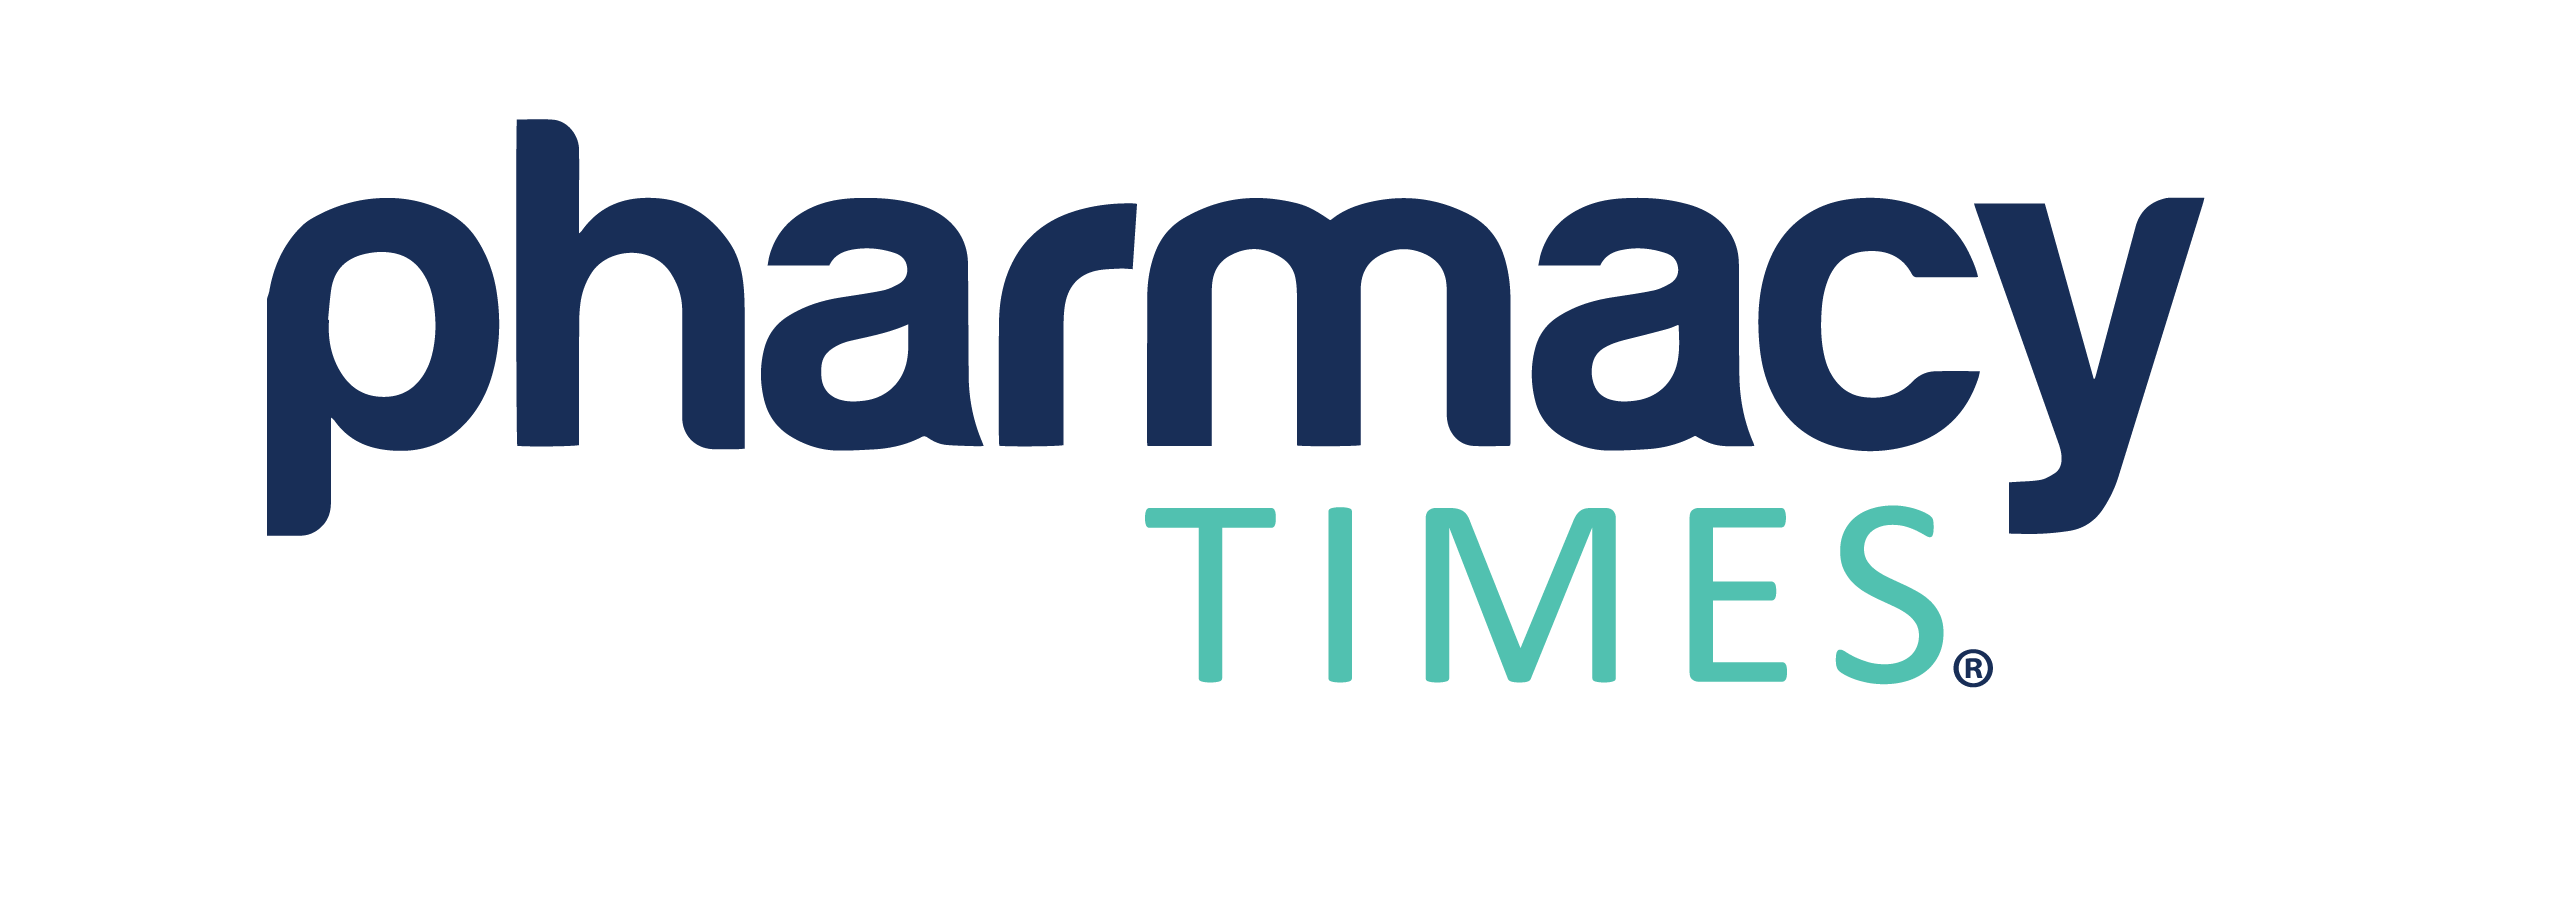 Pharmacy Times – Pharmacy Practice News and Expert Insights